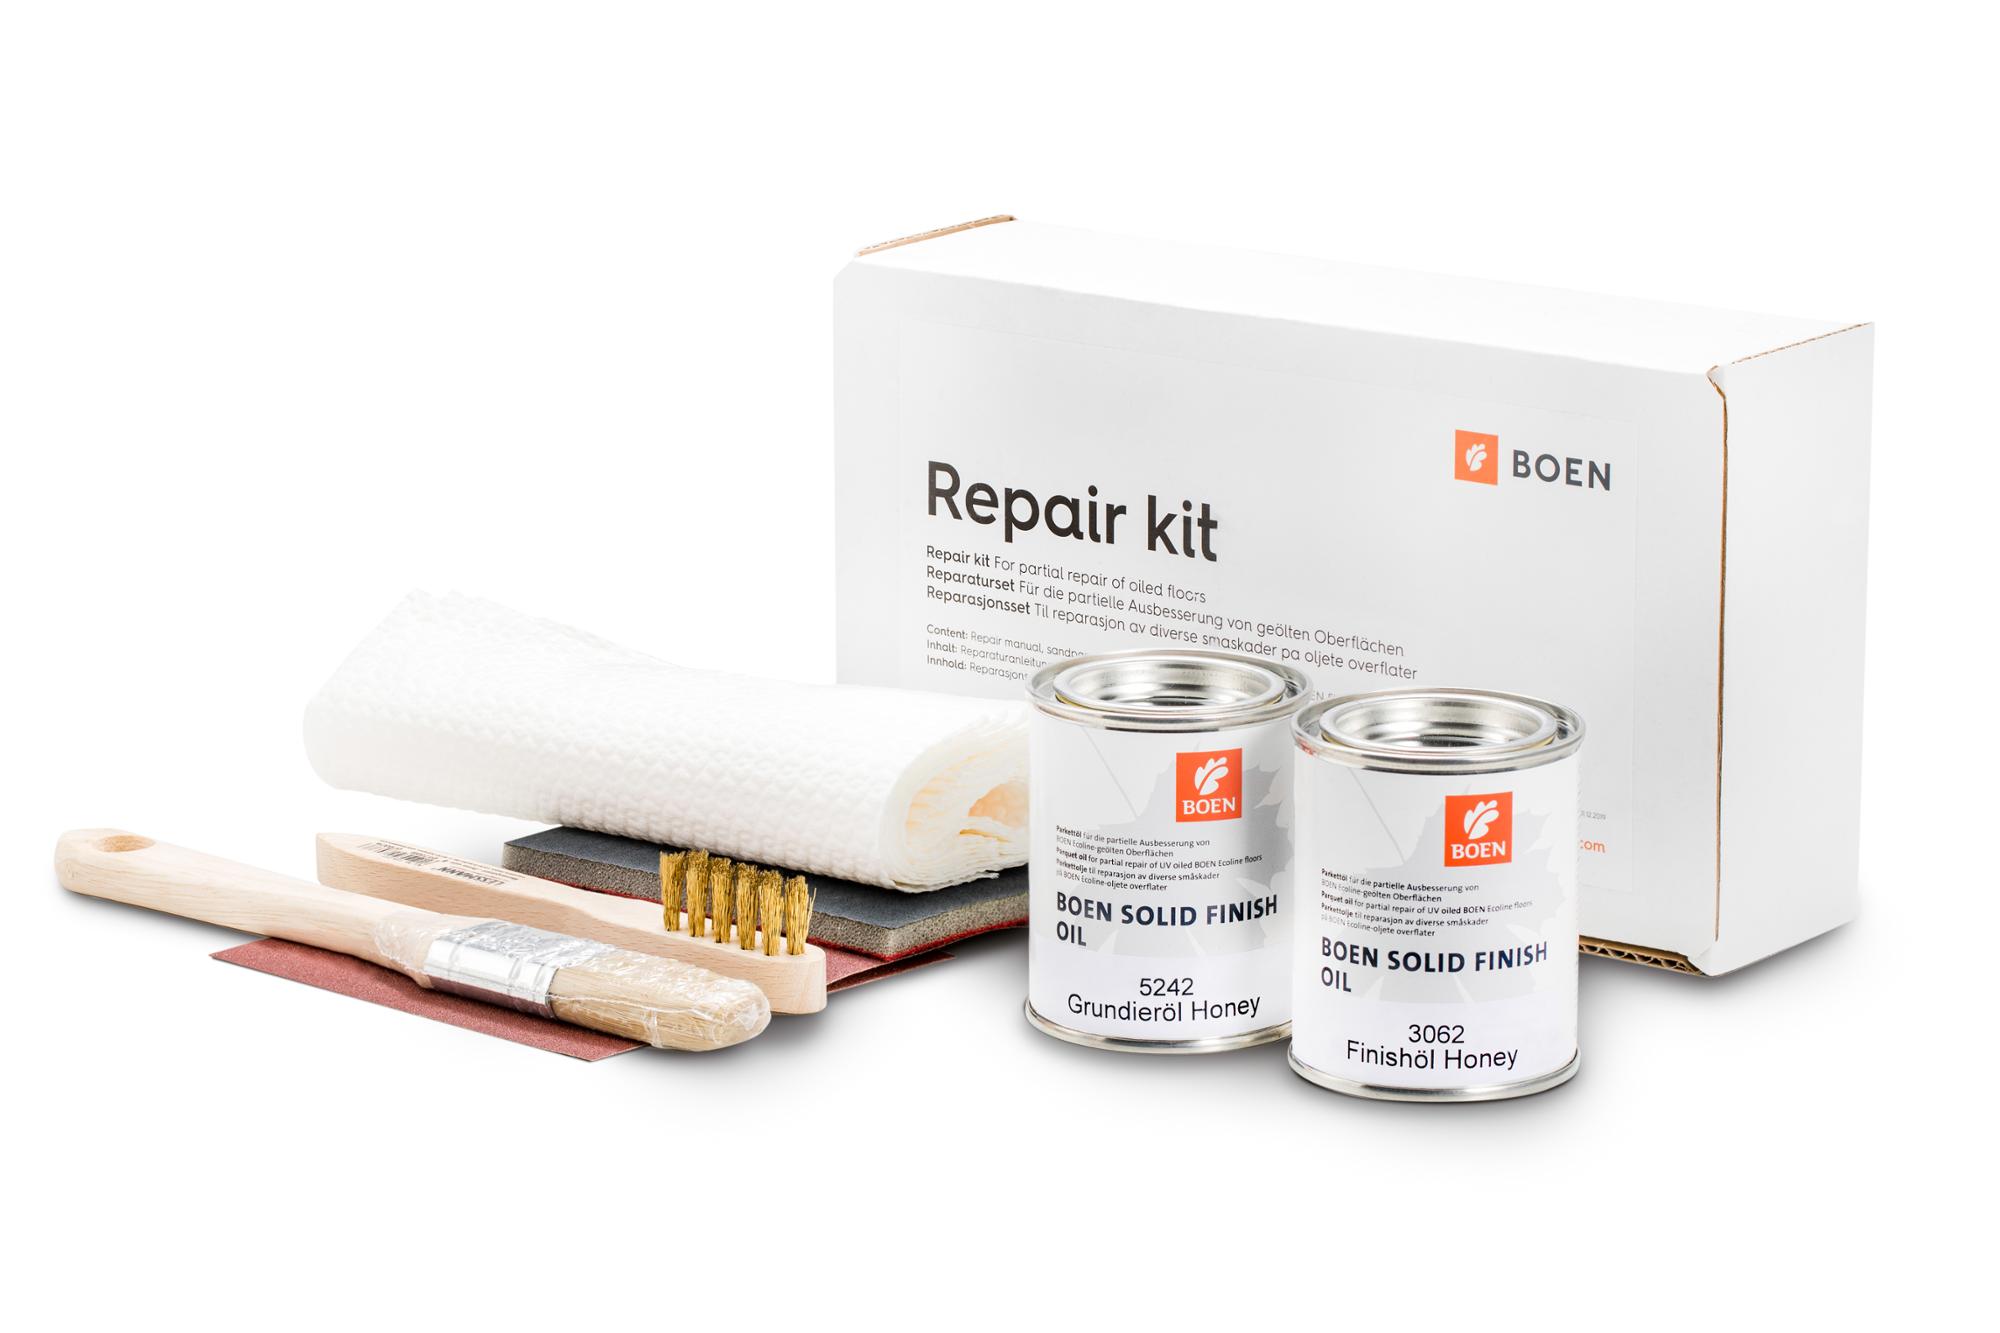 BOEN kit riparazione per Rovere Honey

For the partial repair of natural oiled surfaces.
Content: Repair instruction, abrasive paper P 150,
abrasive web P 360, 0,125 l BOEN Live Natural Oil,
paint brush, cleaning cloths.